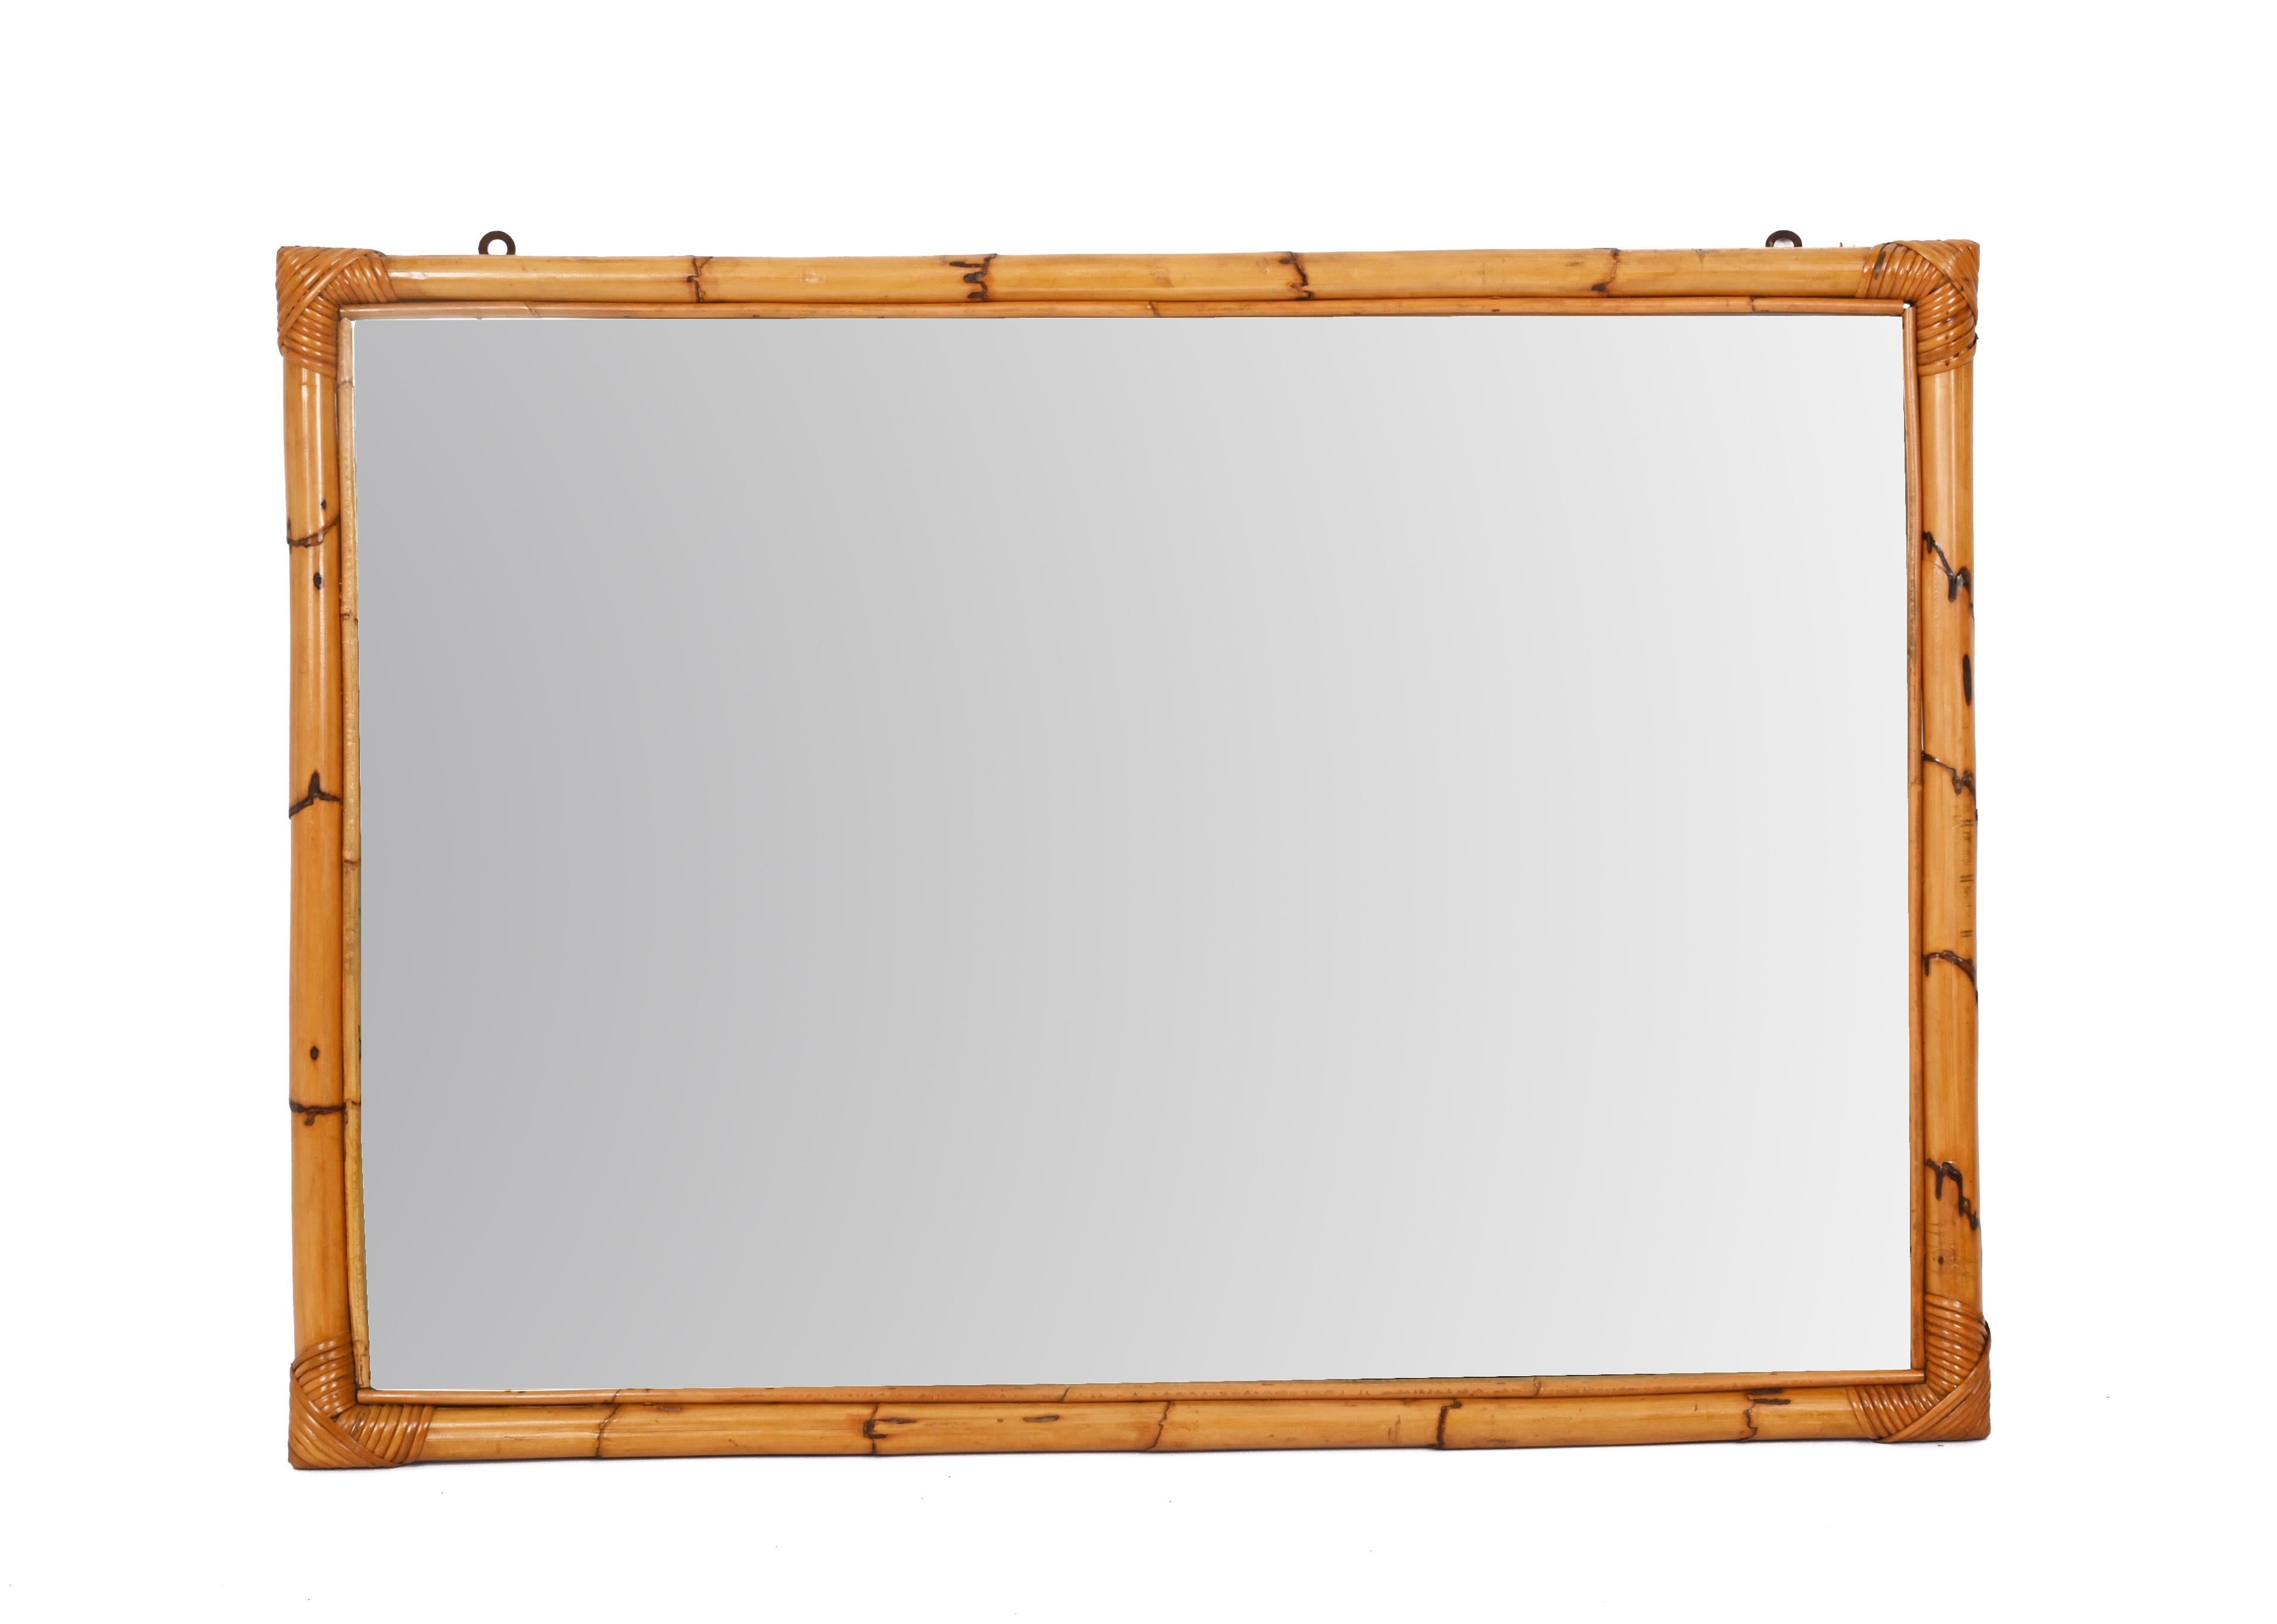 Midcentury Large Rectangular Italian Mirror with Double Bamboo Cane Frame, 1970s For Sale 1